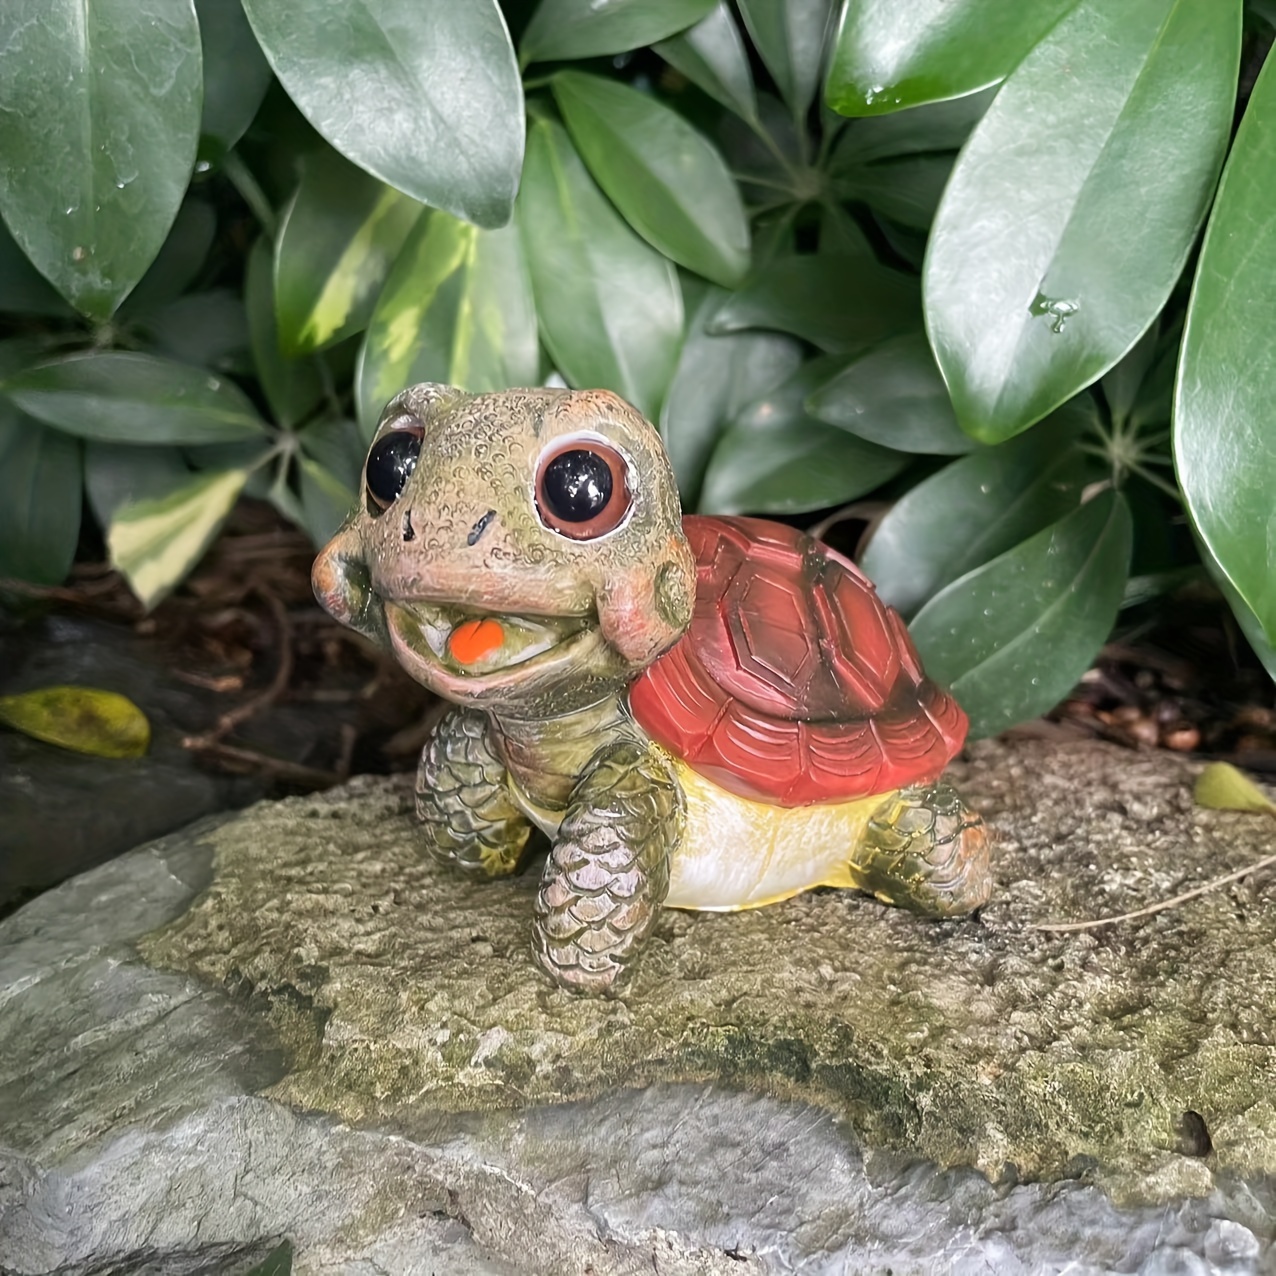 

whimsical" Adorable Cartoon Turtle With Big Eyes - Resin Craft For Garden, Patio, And Home Decor